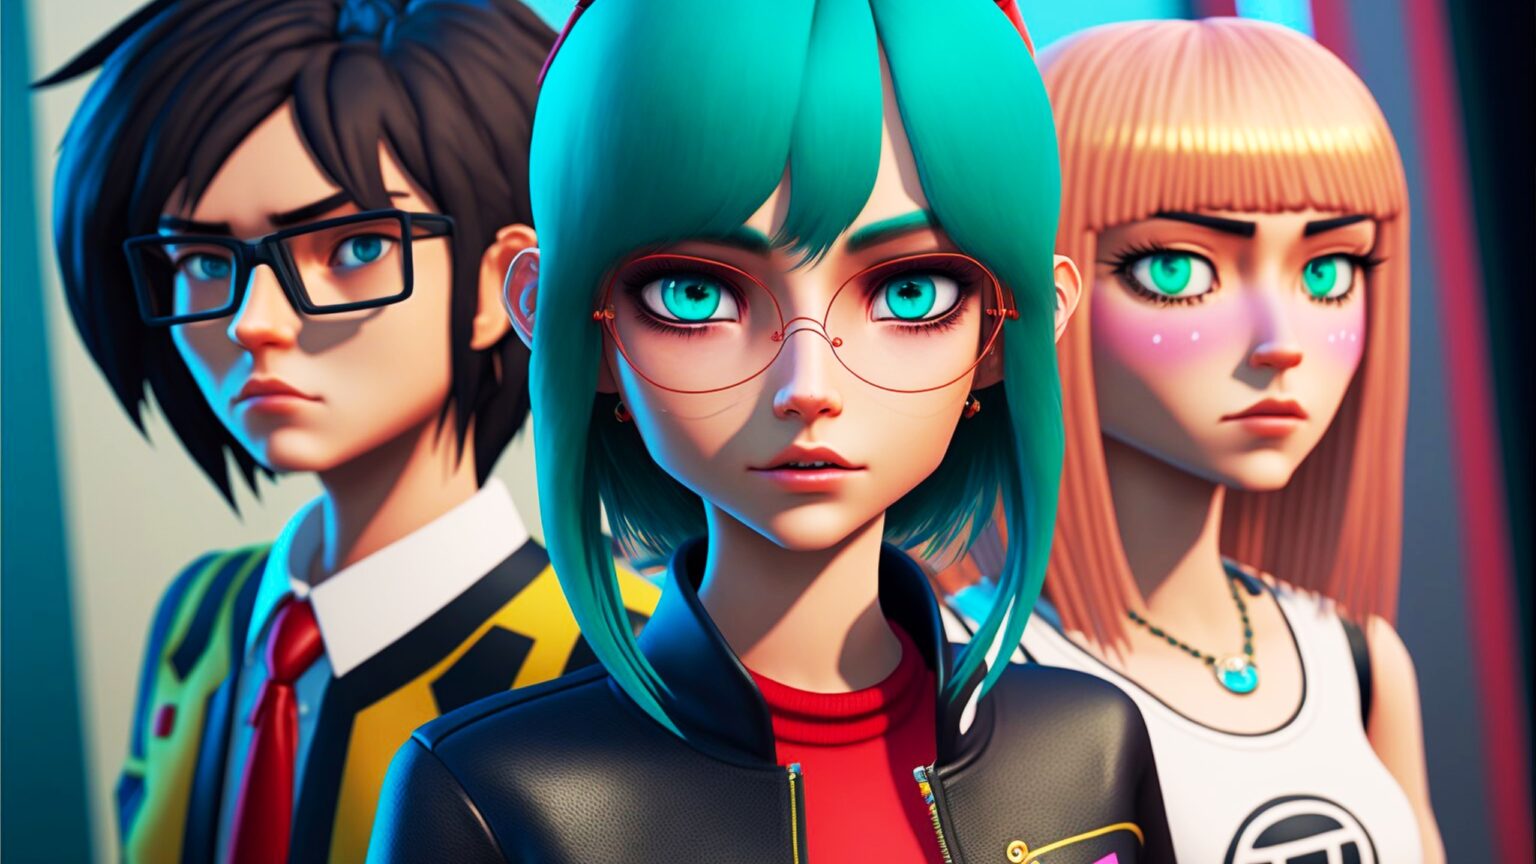 Metaverse Invaded by Anime Avatars